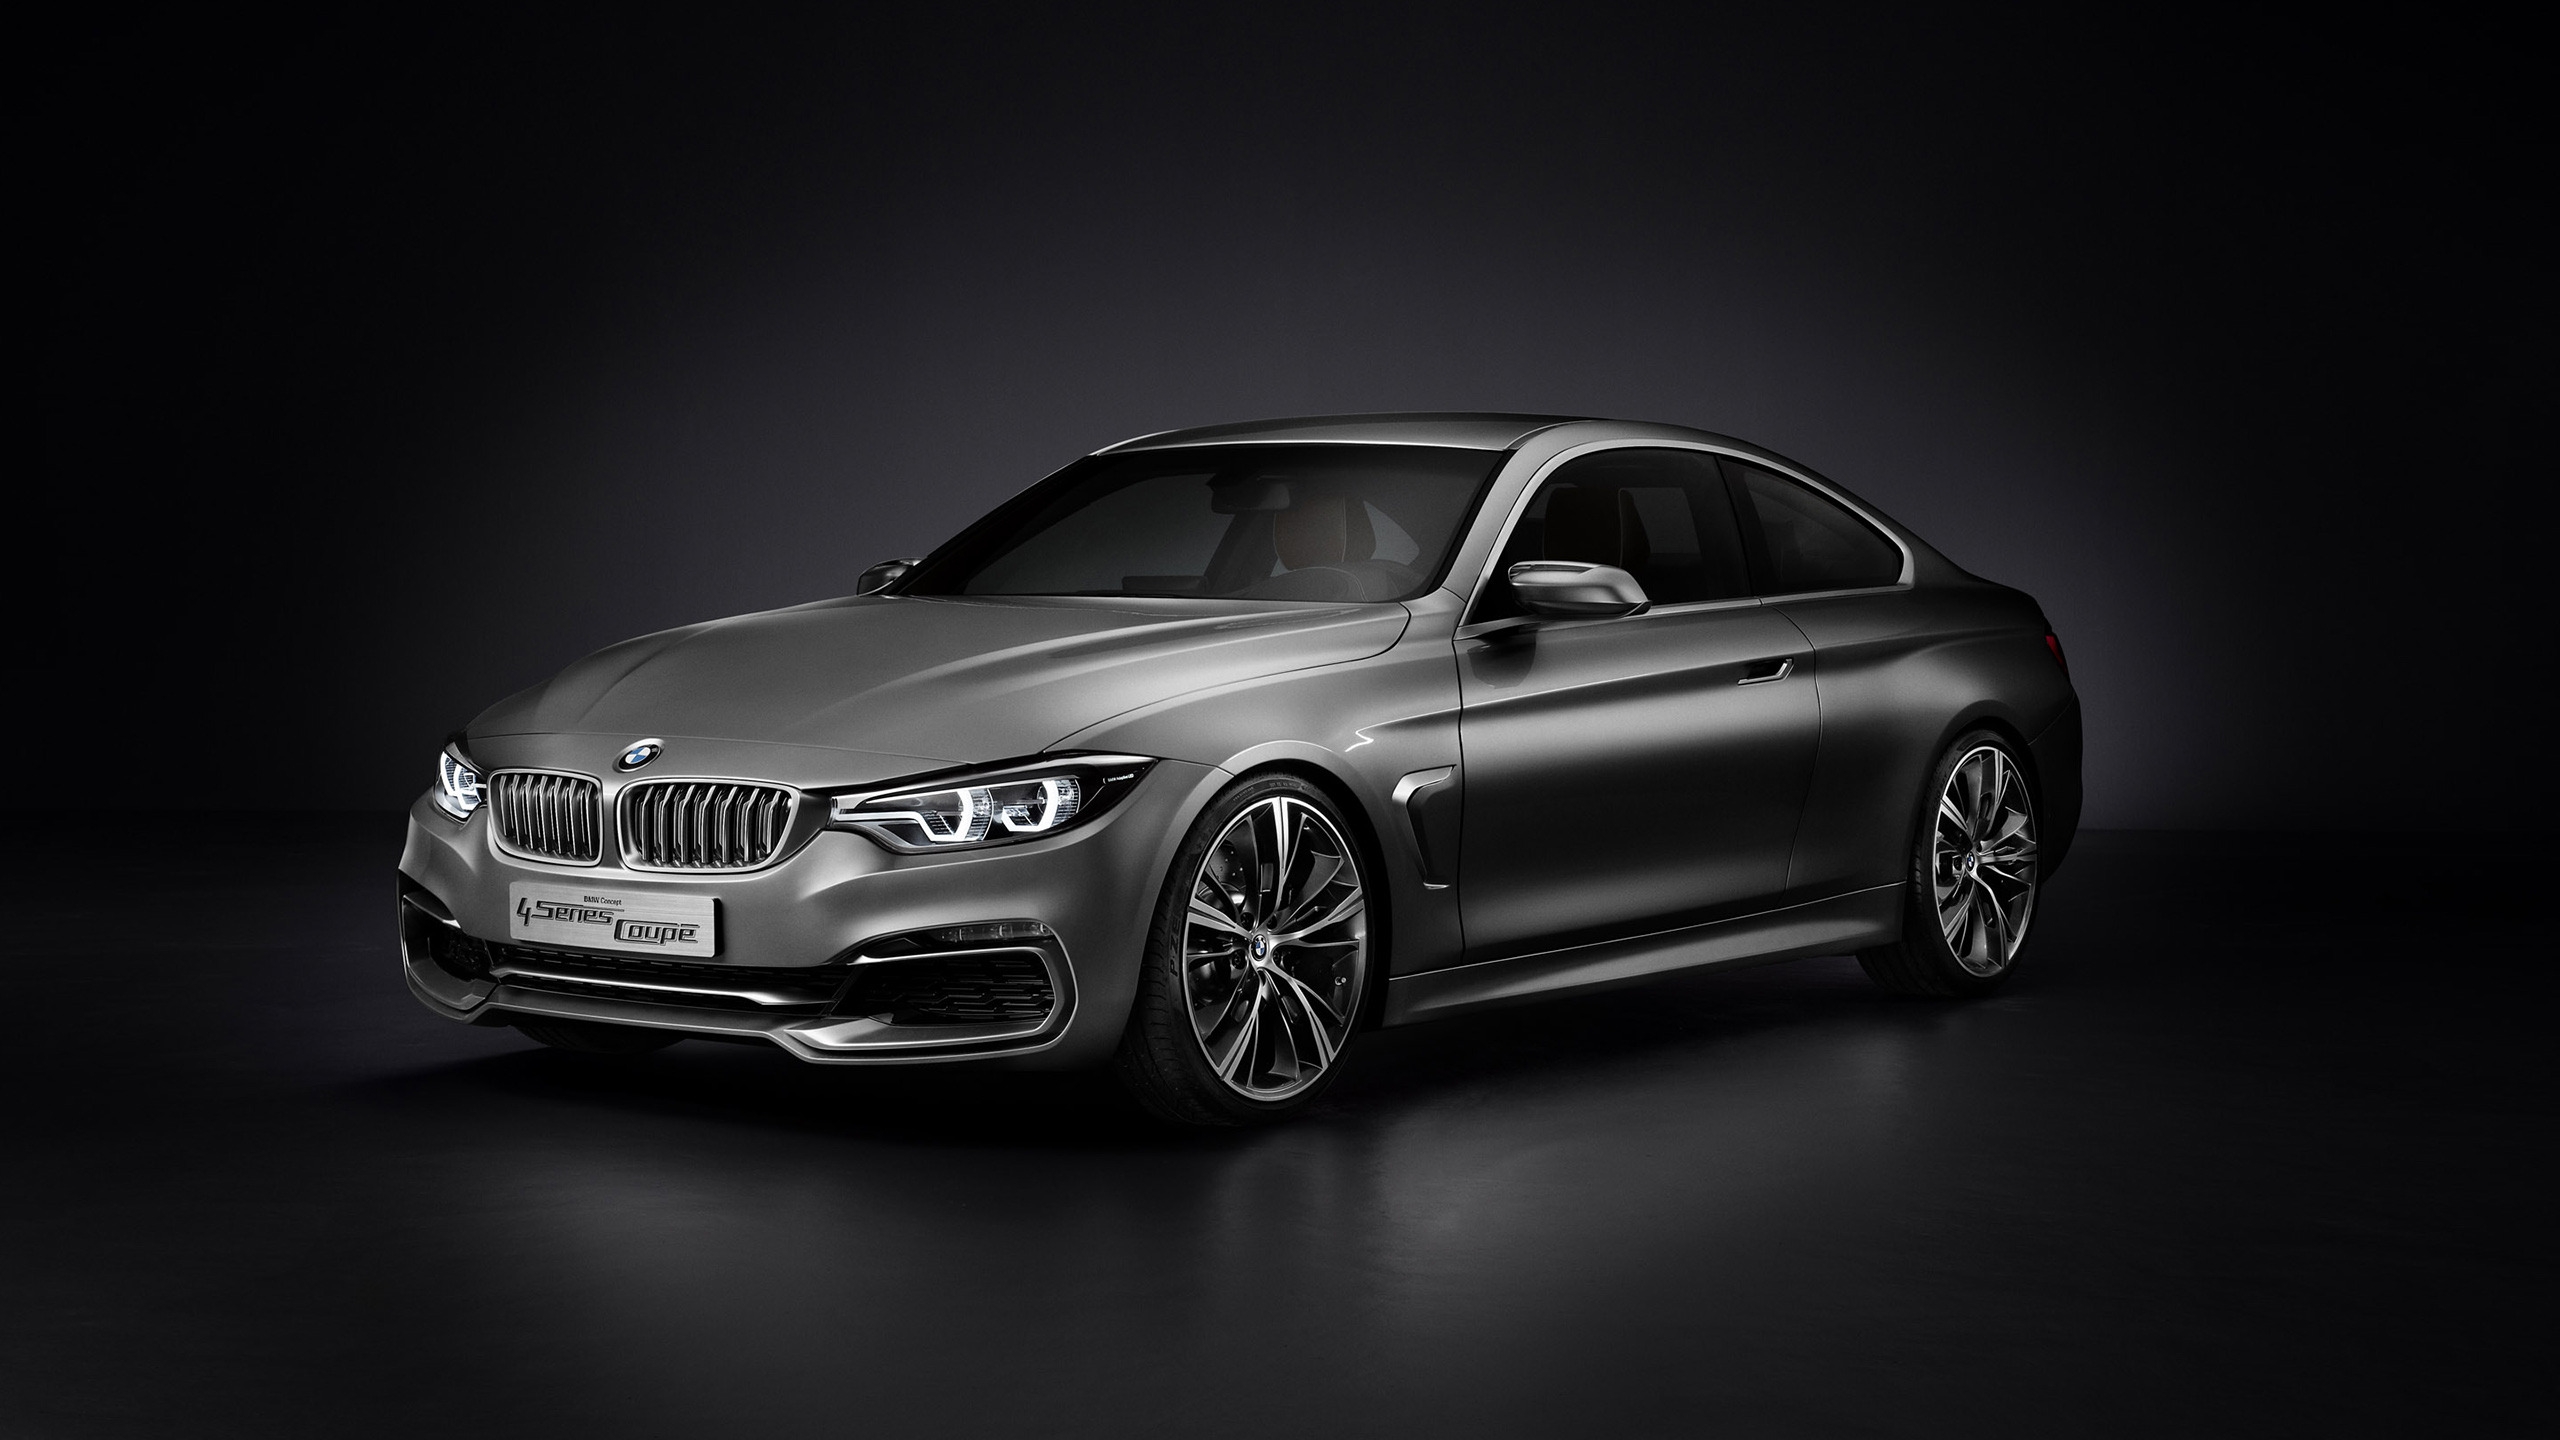 BMW 4 Series Coupe Concept Studio for 2560x1440 HDTV resolution